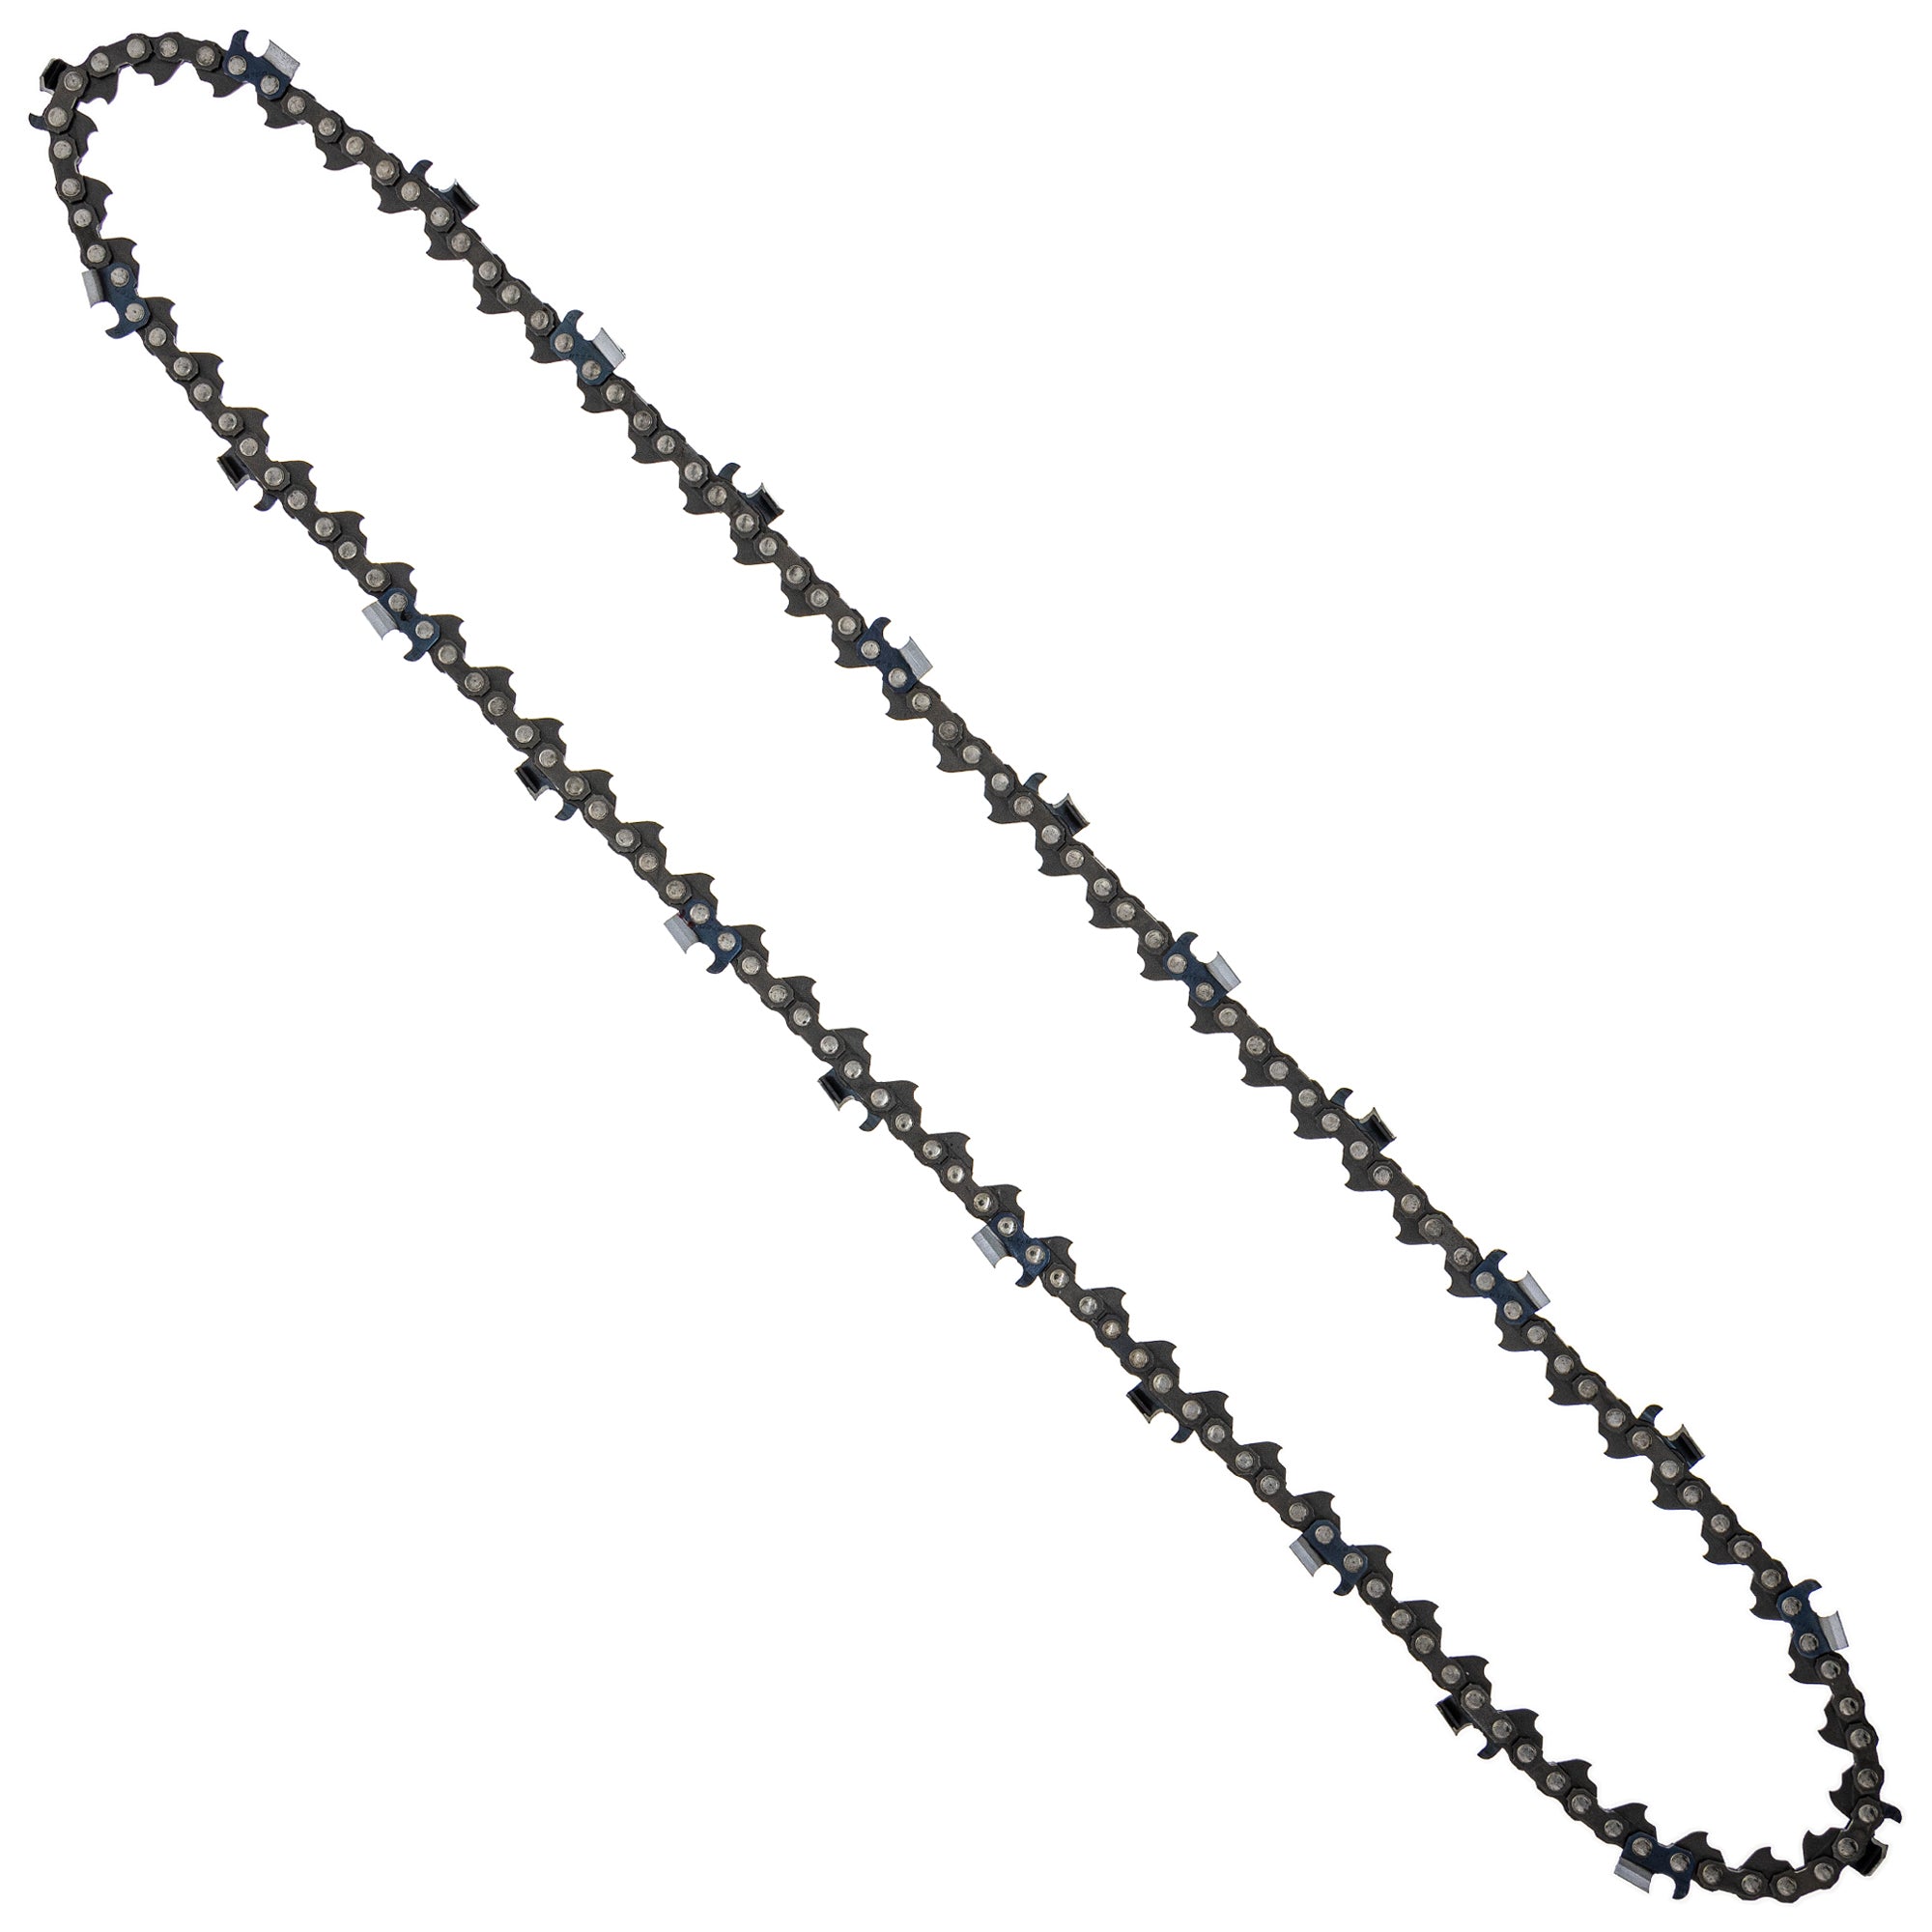 8TEN 810-CCC2258H Chain 2-Pack for zOTHER Ref No Oregon Husqvarna